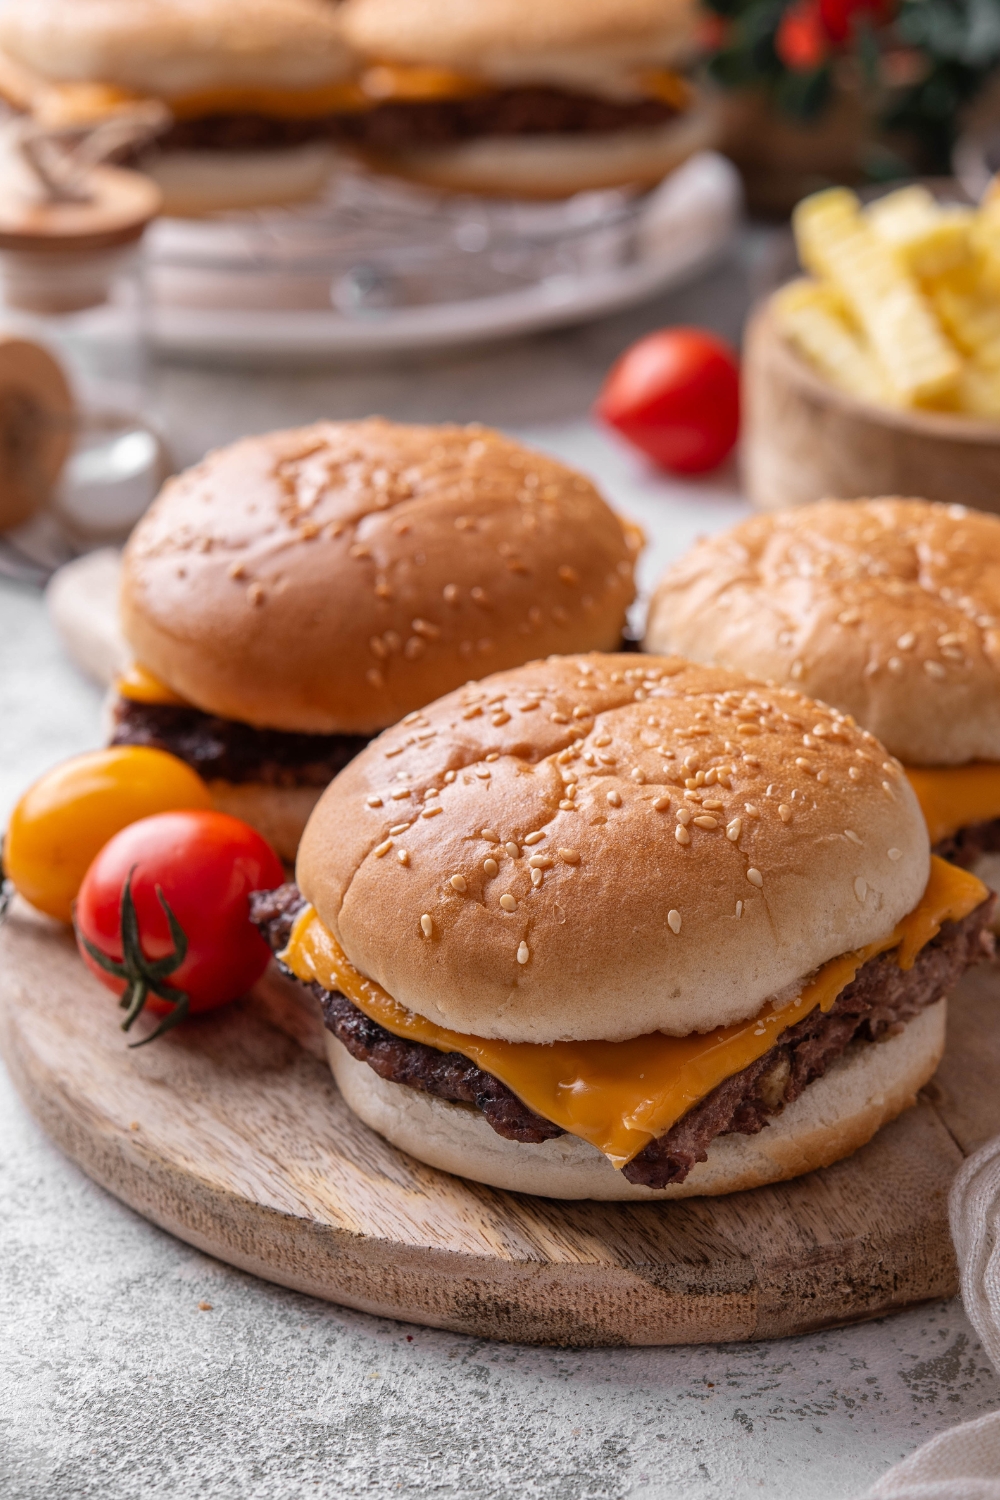 Three white castle sliders sit on a wooden serving board.